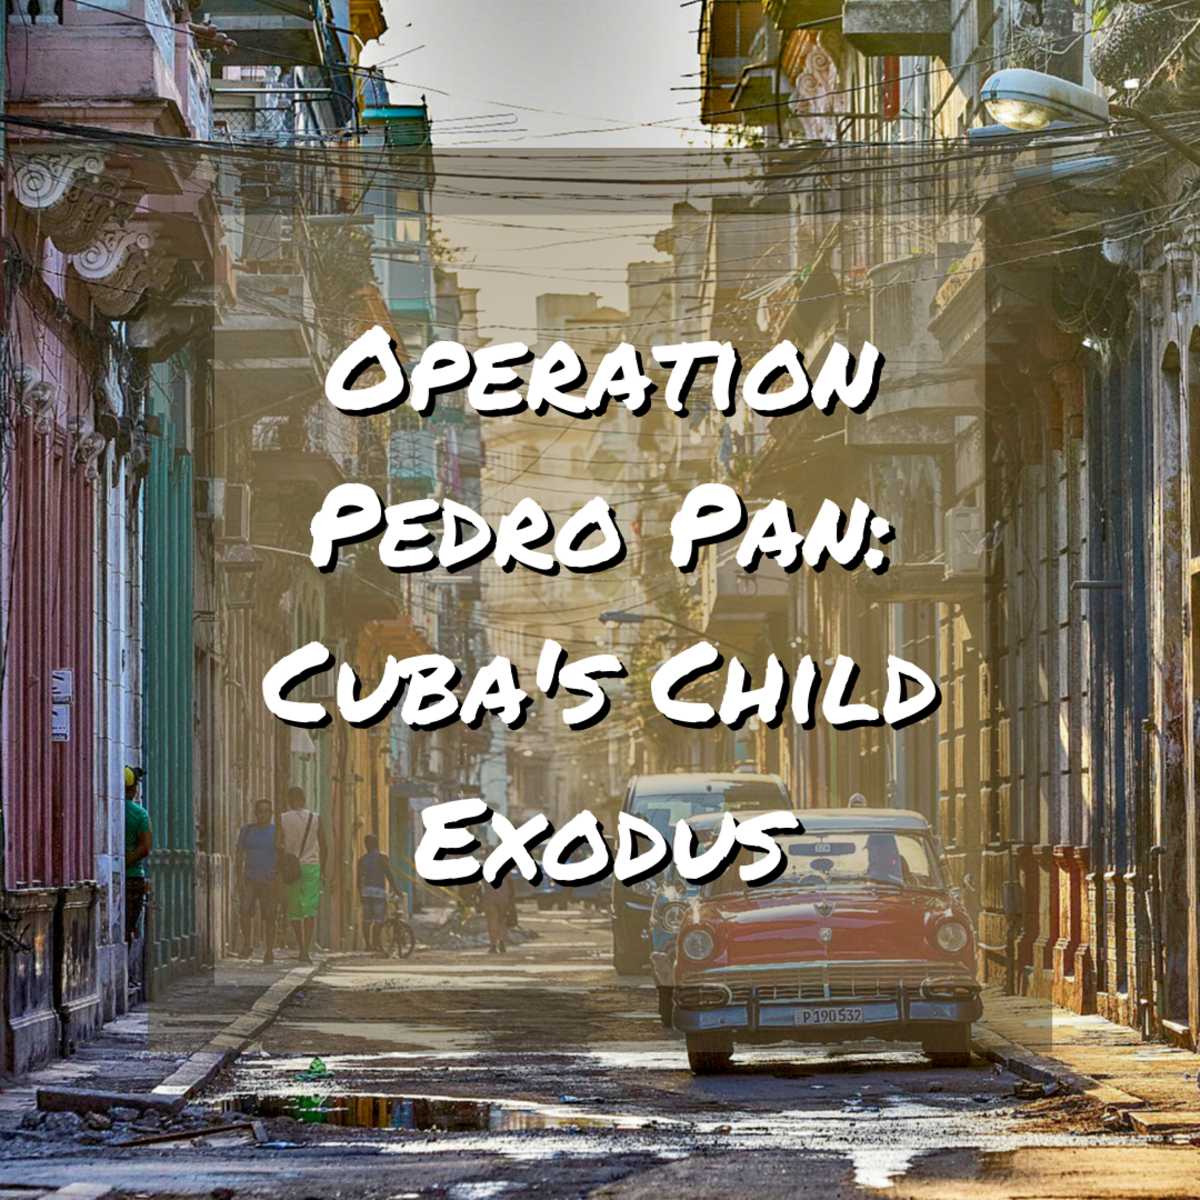 This article discusses Operation Pedro Pan, a US government program to bring unaccompanied minors to the US during the Cuban Missile Crisis.